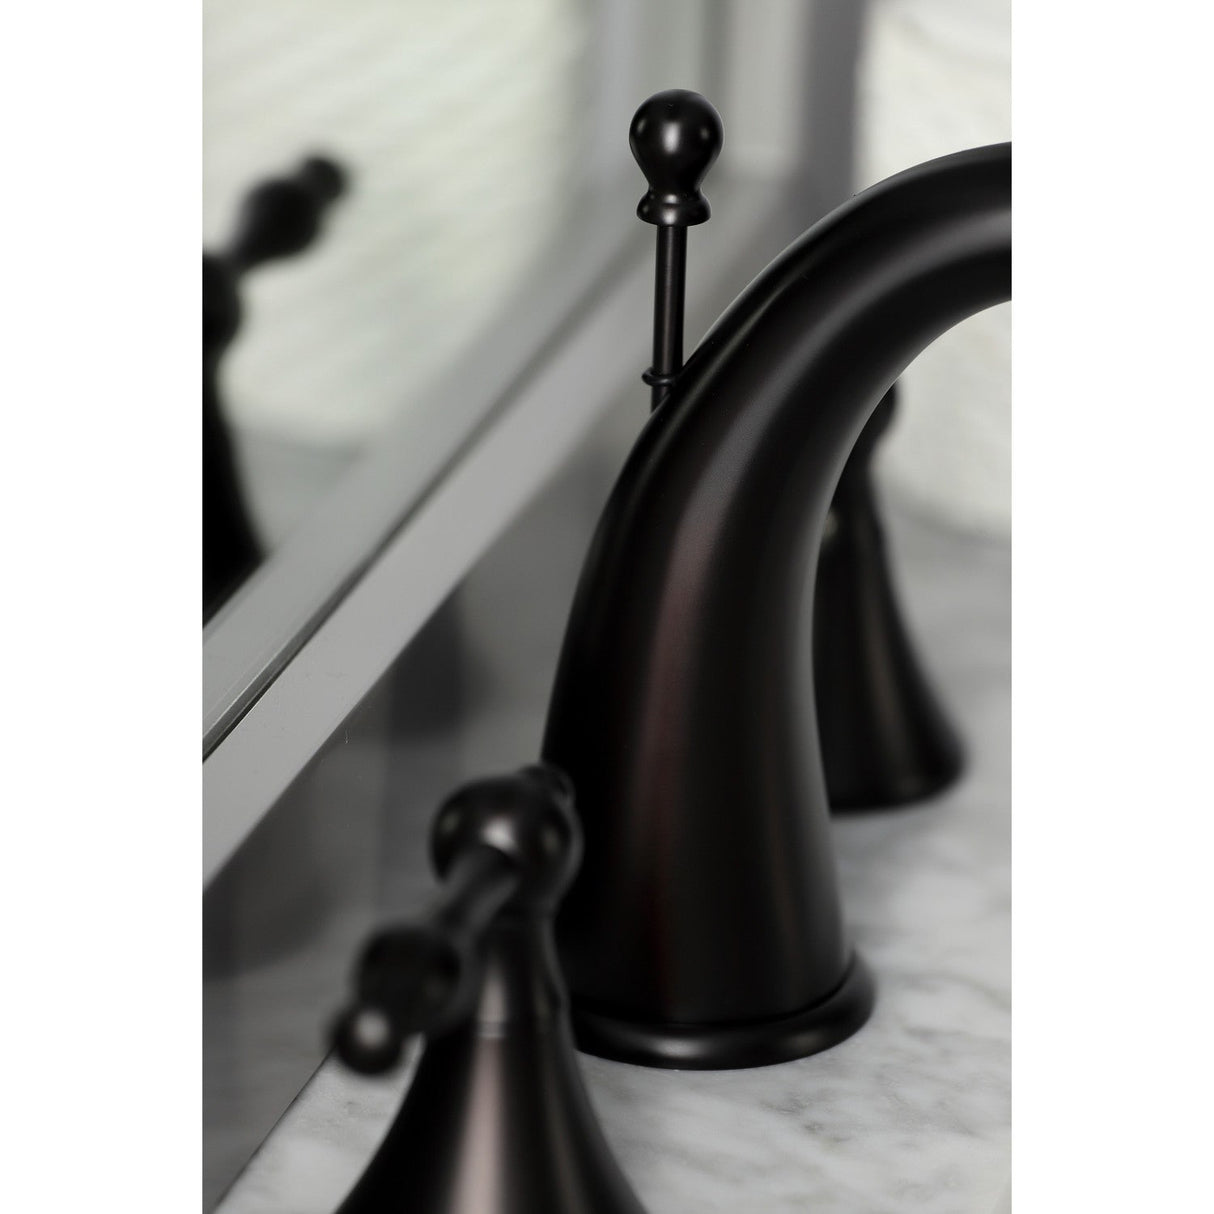 Naples KS2975NL Two-Handle 3-Hole Deck Mount Widespread Bathroom Faucet with Brass Pop-Up, Oil Rubbed Bronze